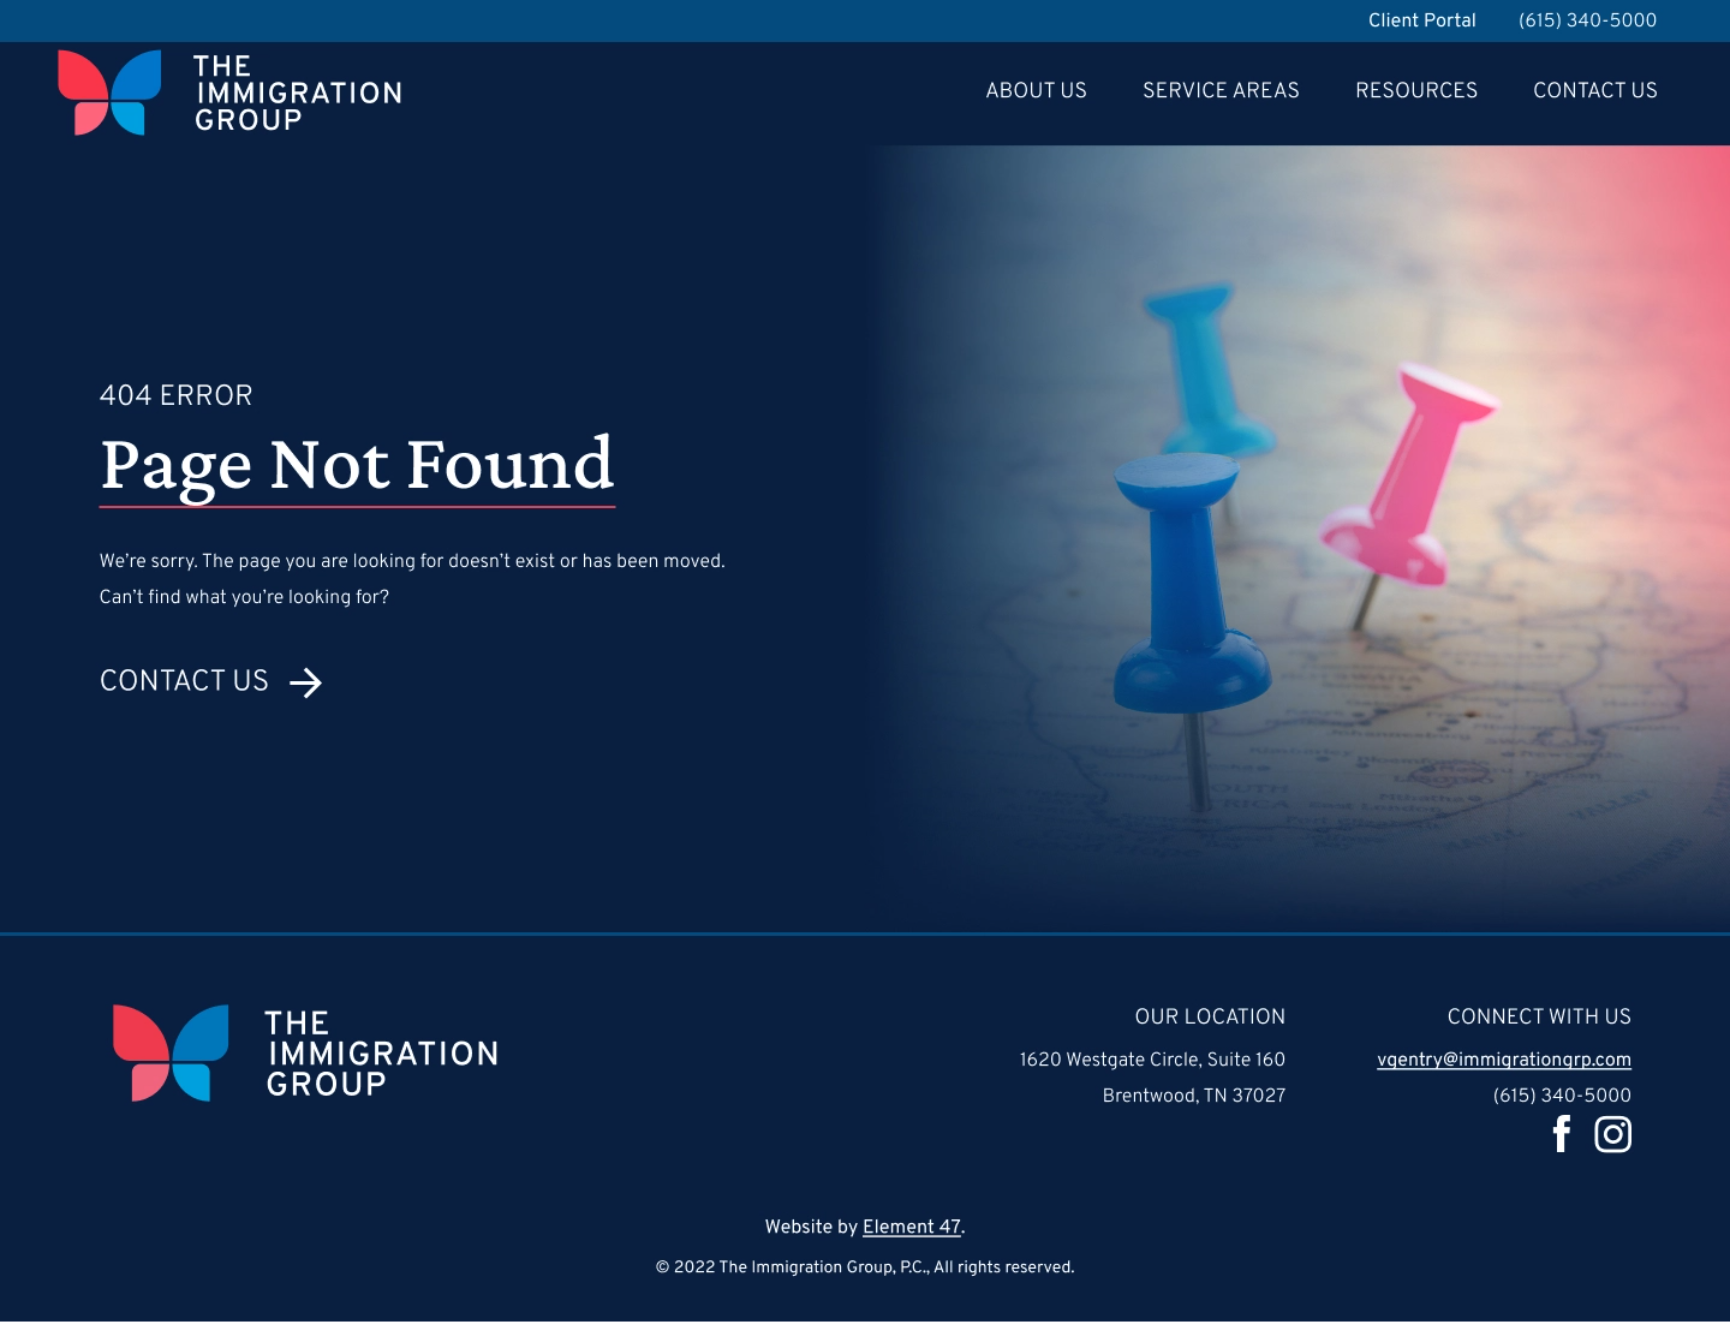 The Immigration Group 404 page design